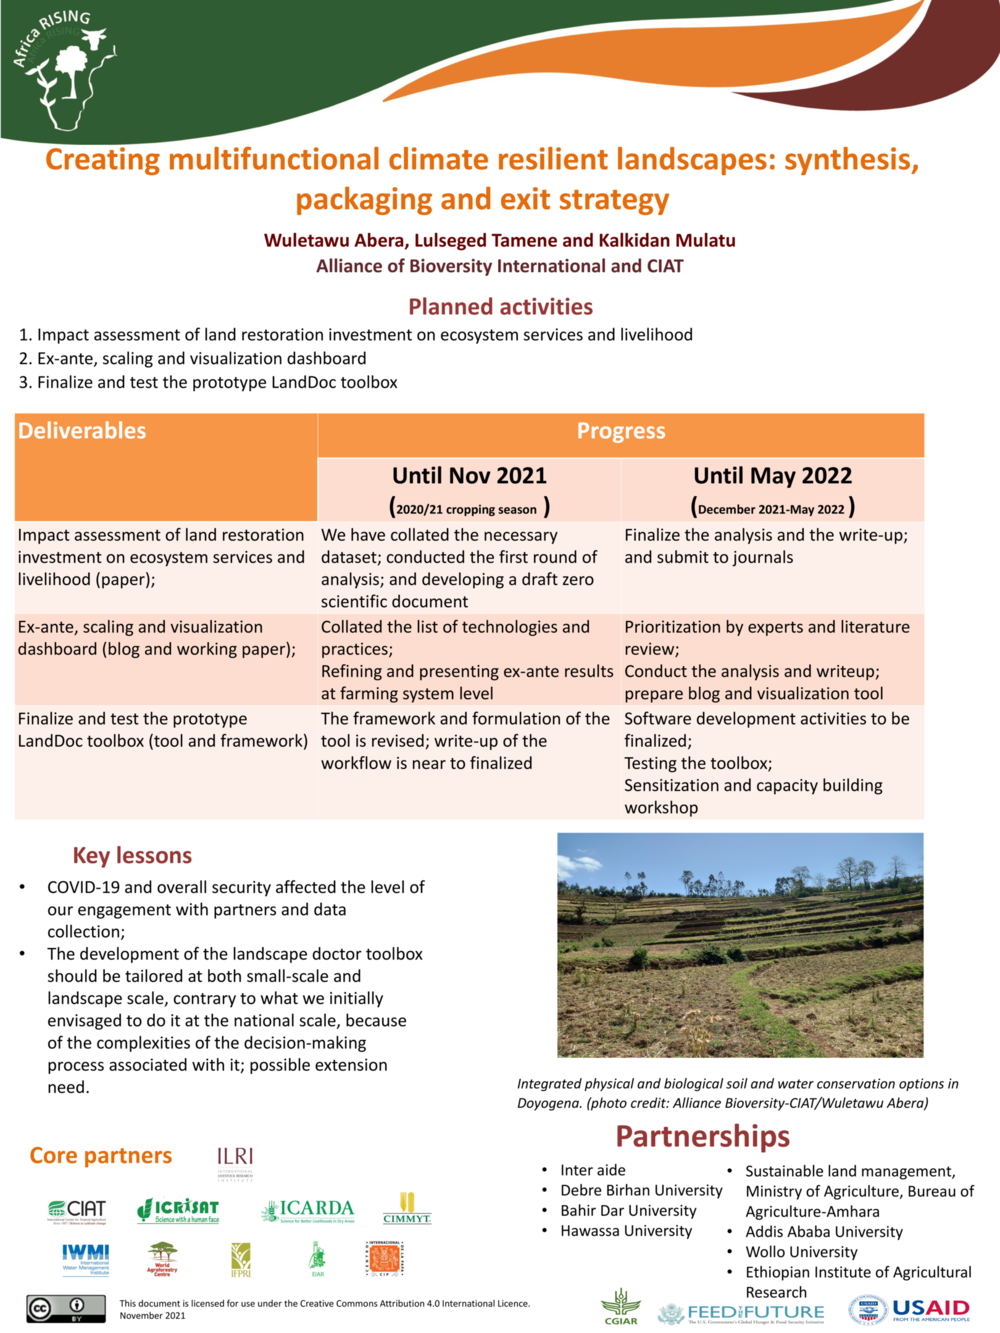 3.Creating multifunctional climate resilient landscapes: synthesis, packaging and exit strategy 